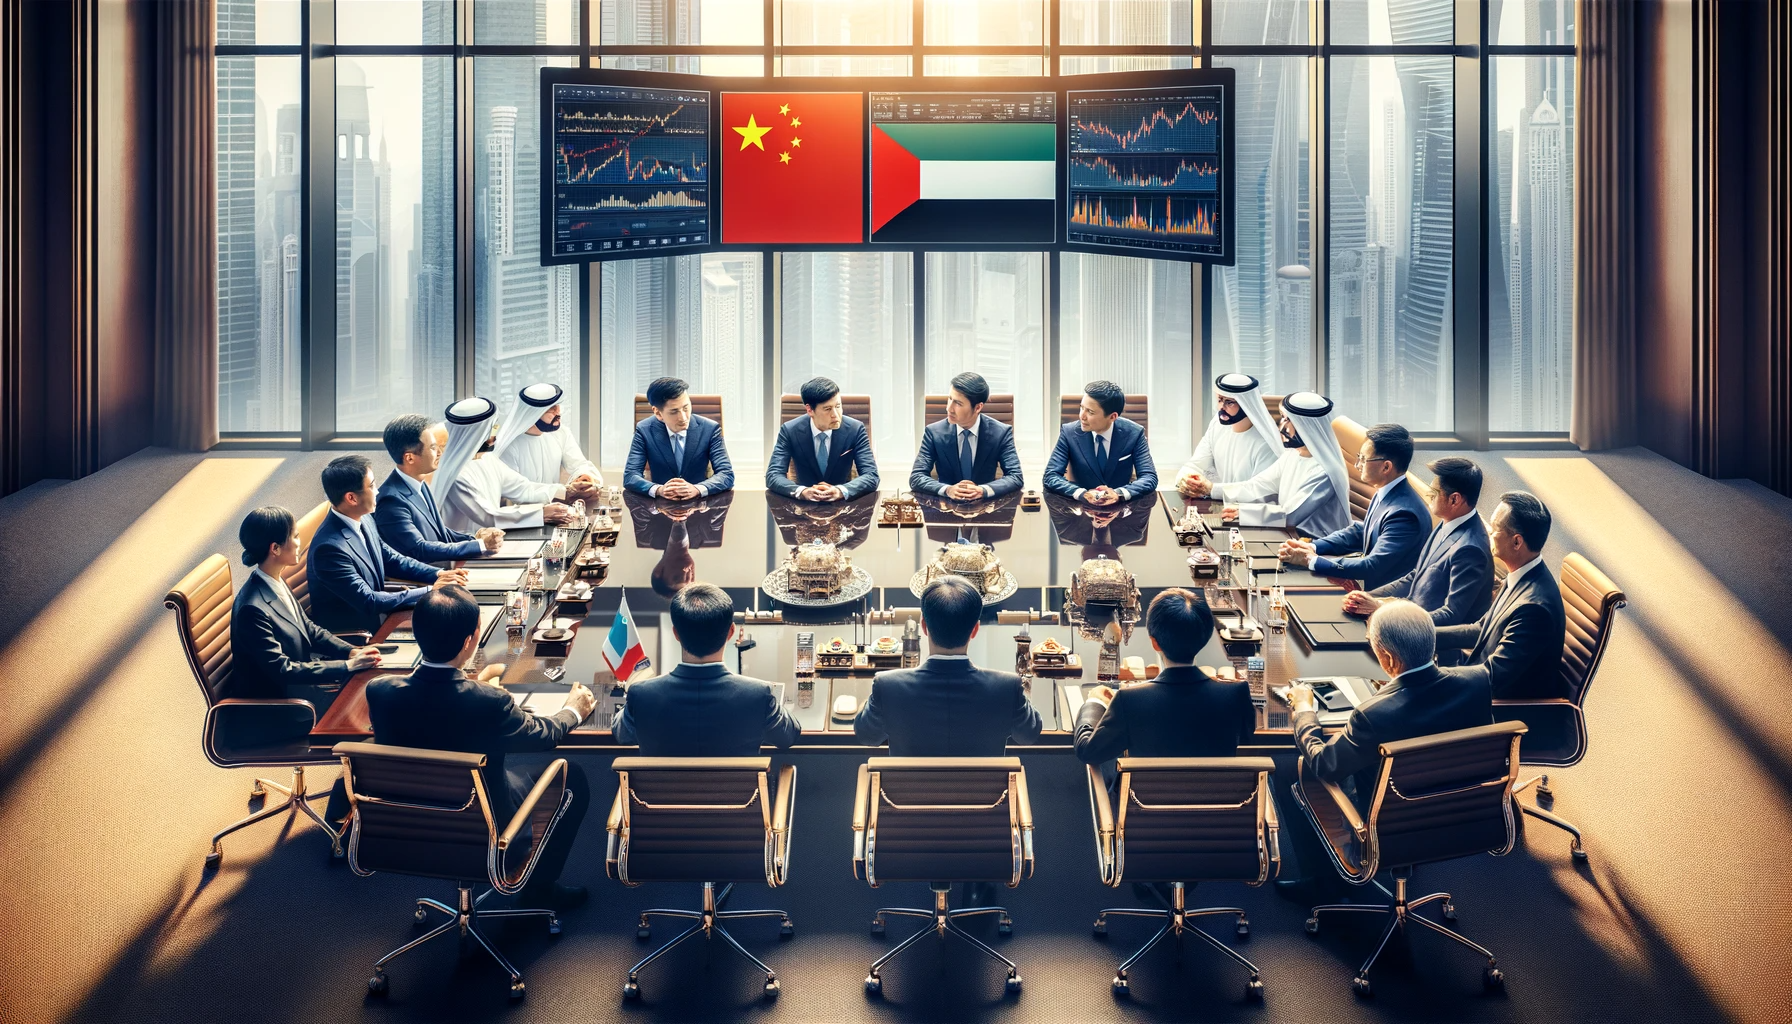 DALL·E 2024 01 10 21.30.28 a meeting between Chinese wealth managers and Dubai financial officials symbolizing the growing business collaboration. The image depicts a formal bu